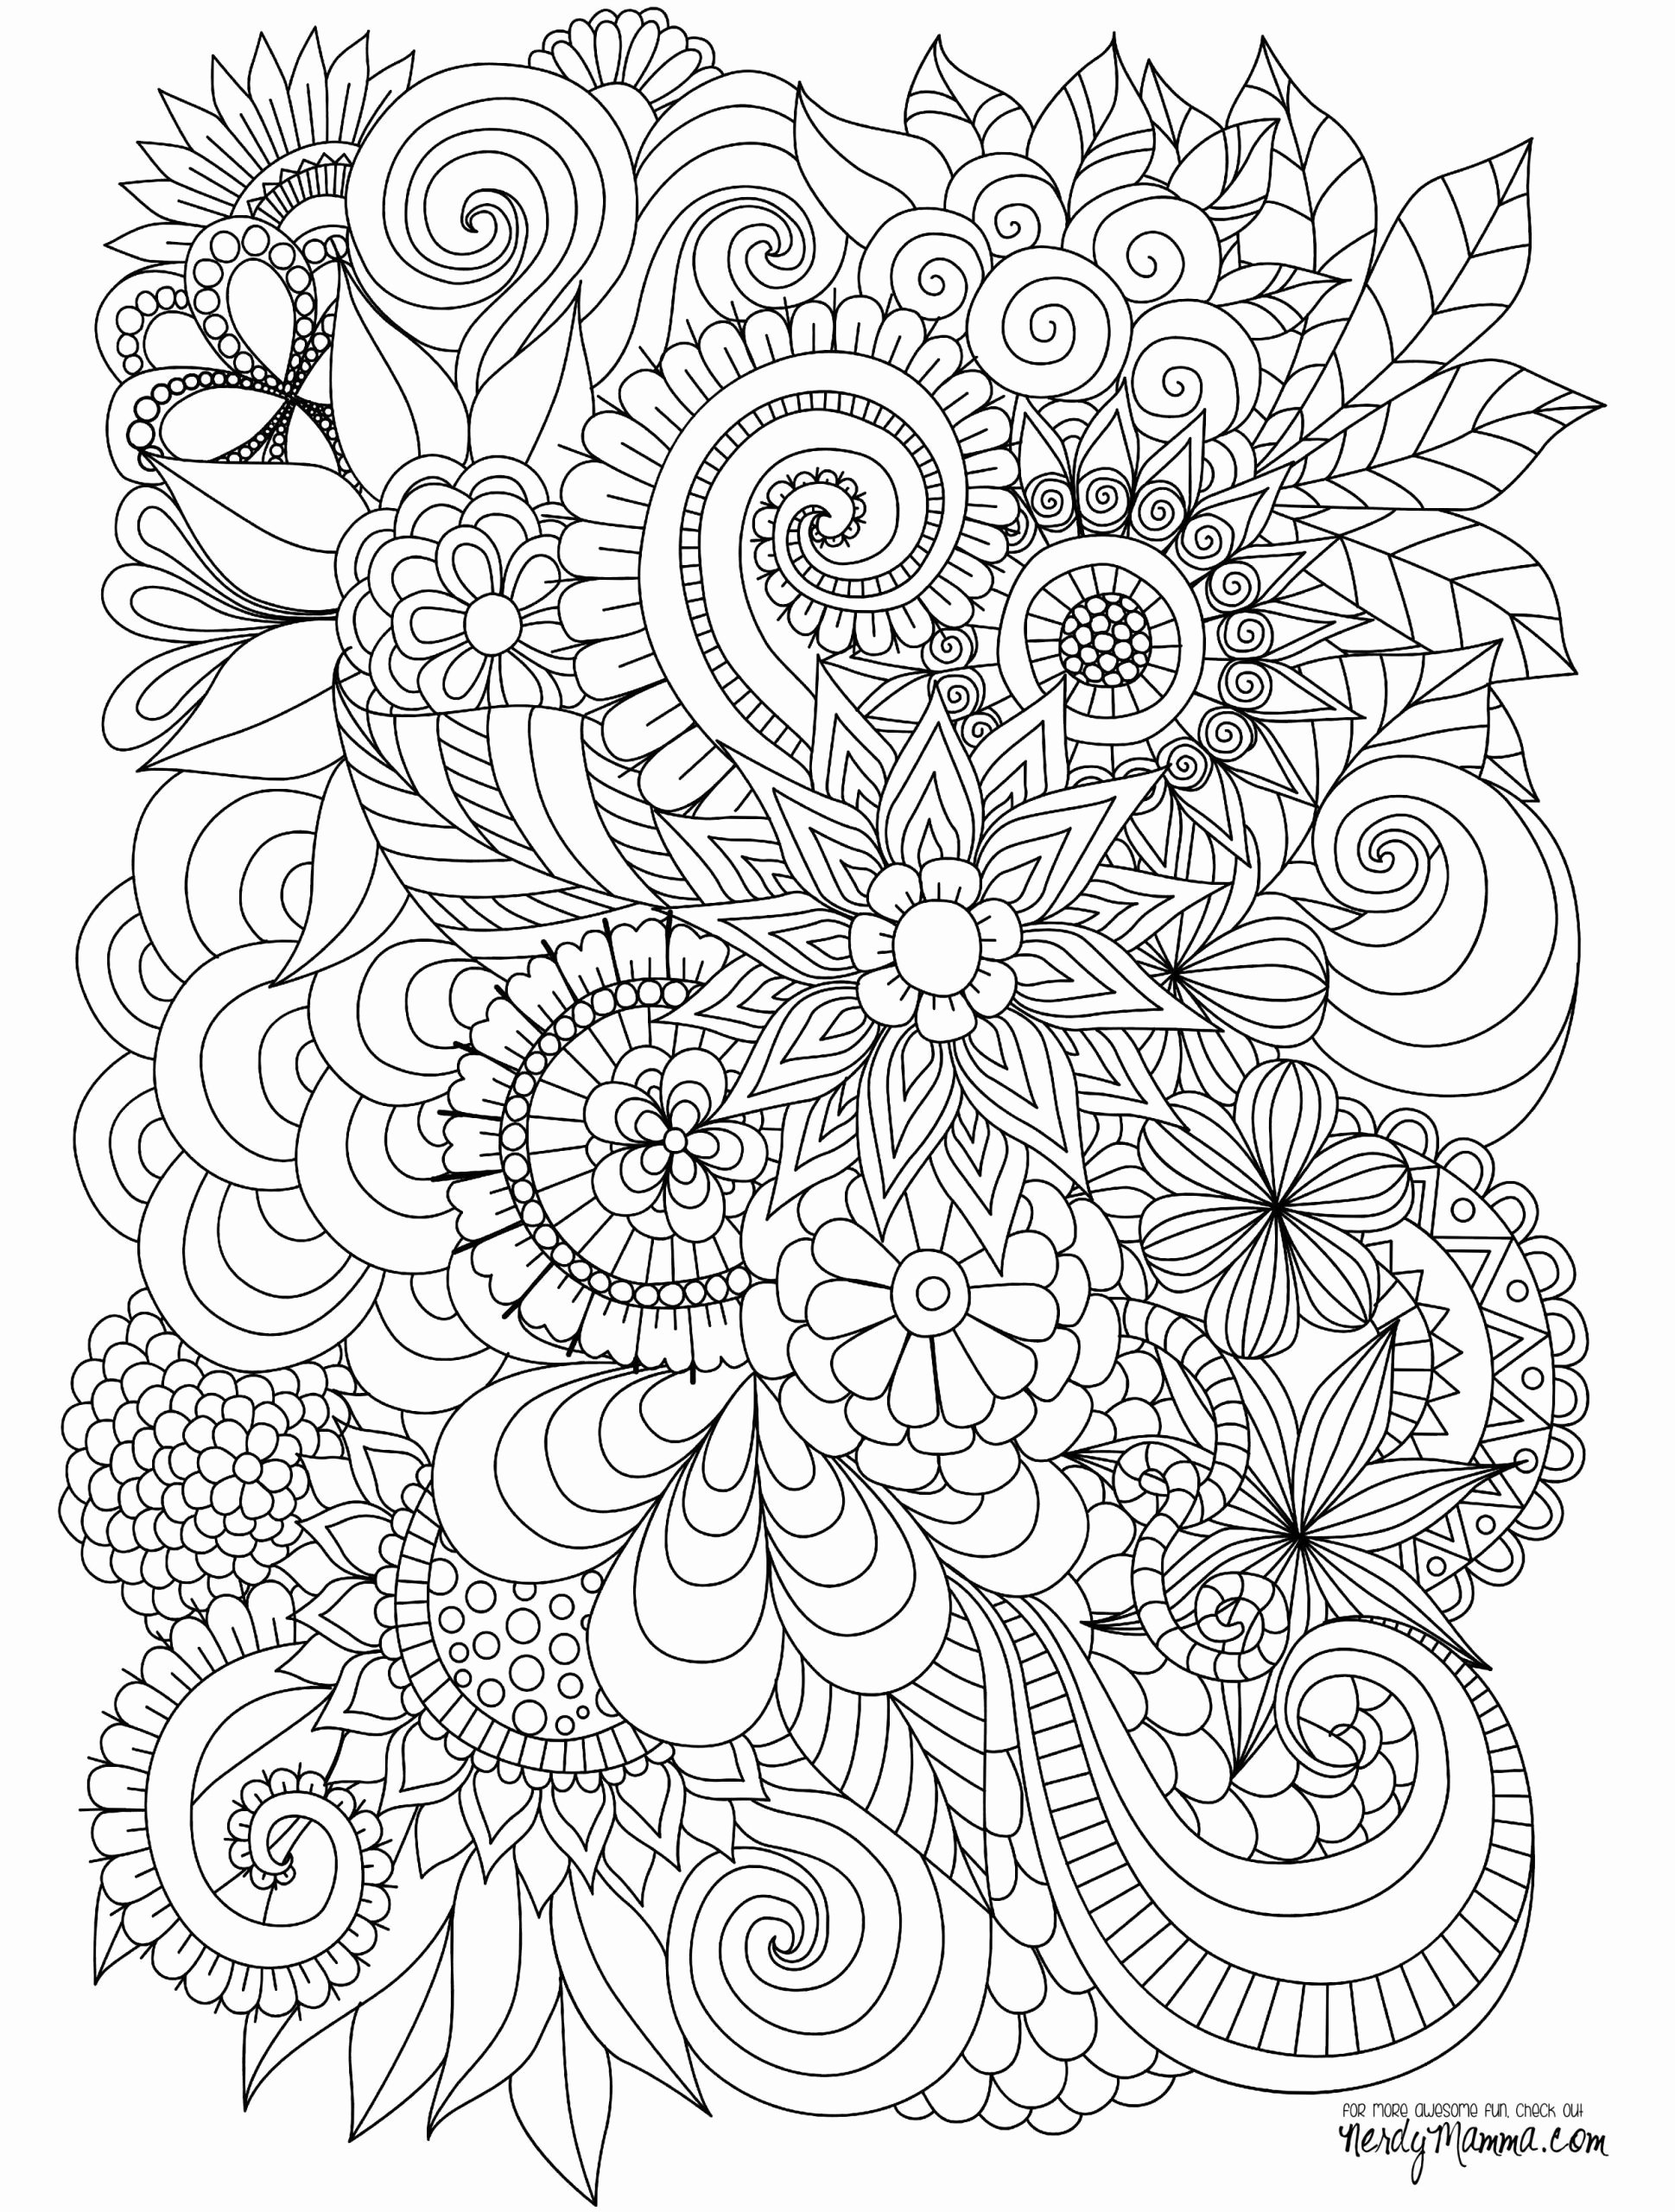 Free Mindful Coloring Pages Fresh ...meriwetherfoundation.org